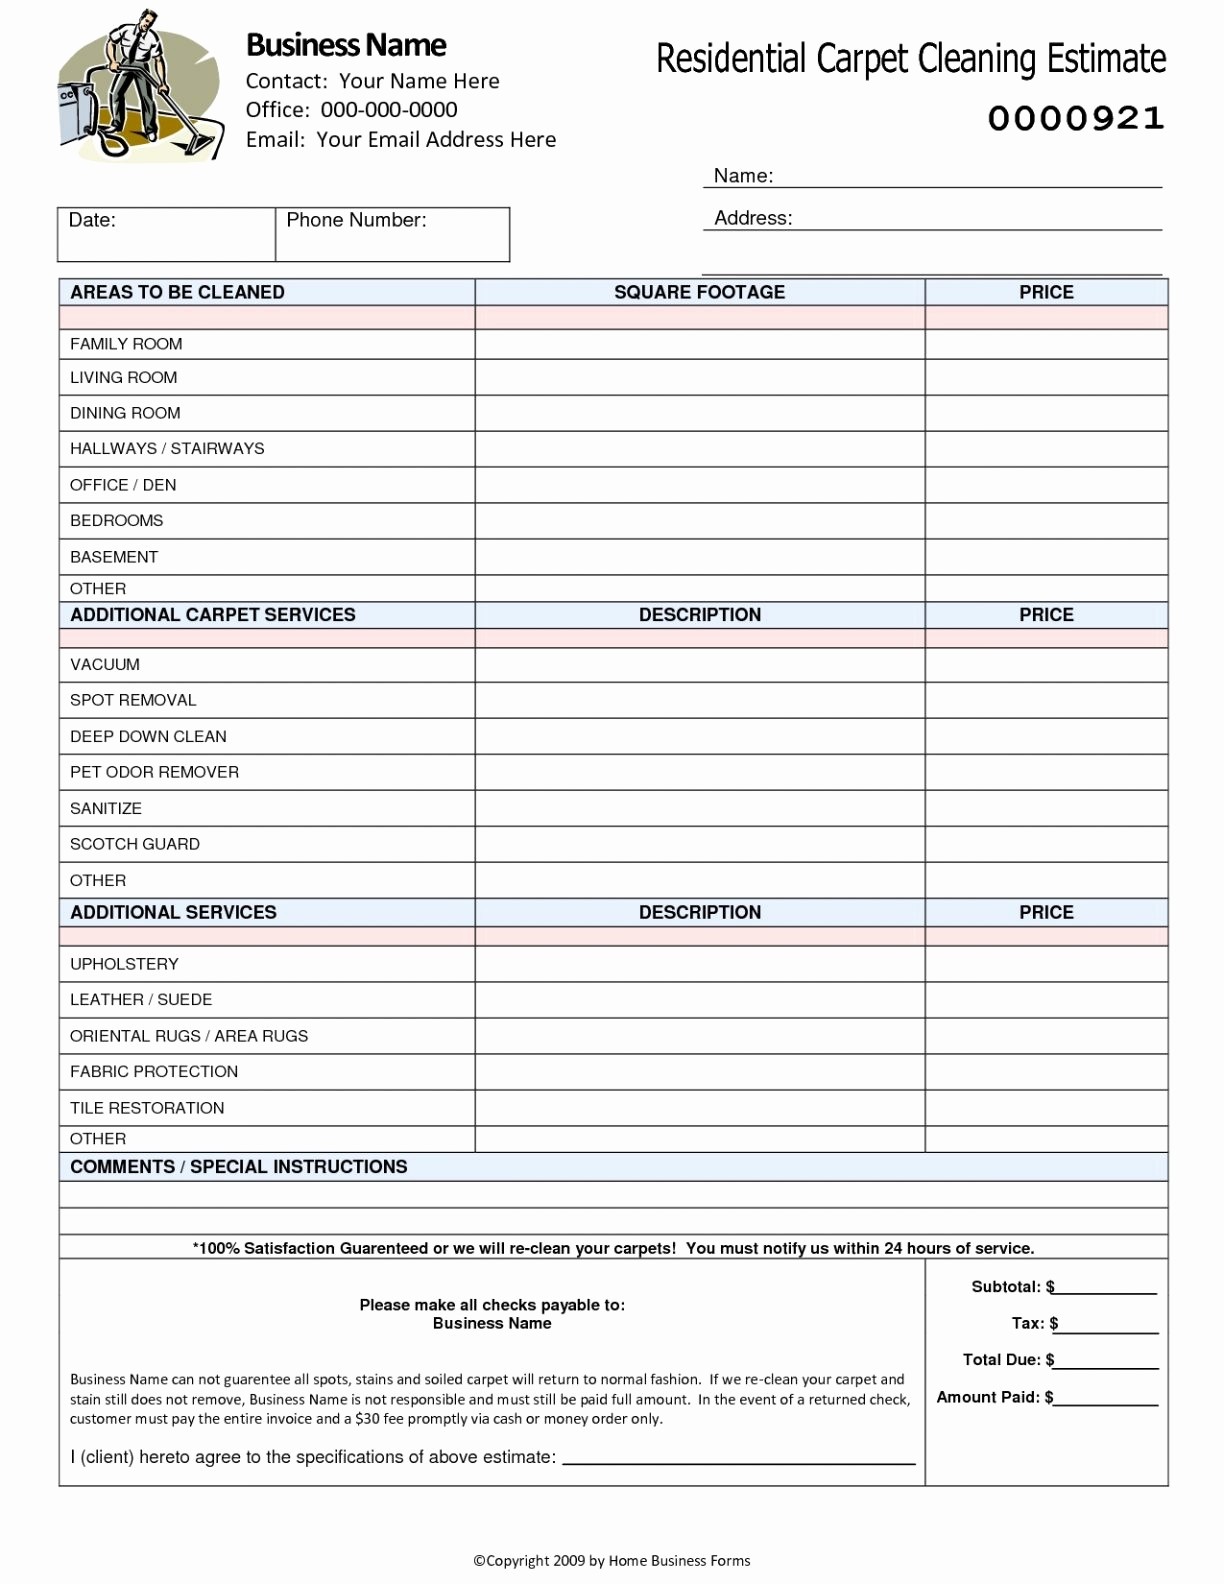 Commercial Construction Cost Estimate Spreadsheet Best Of Excel Document